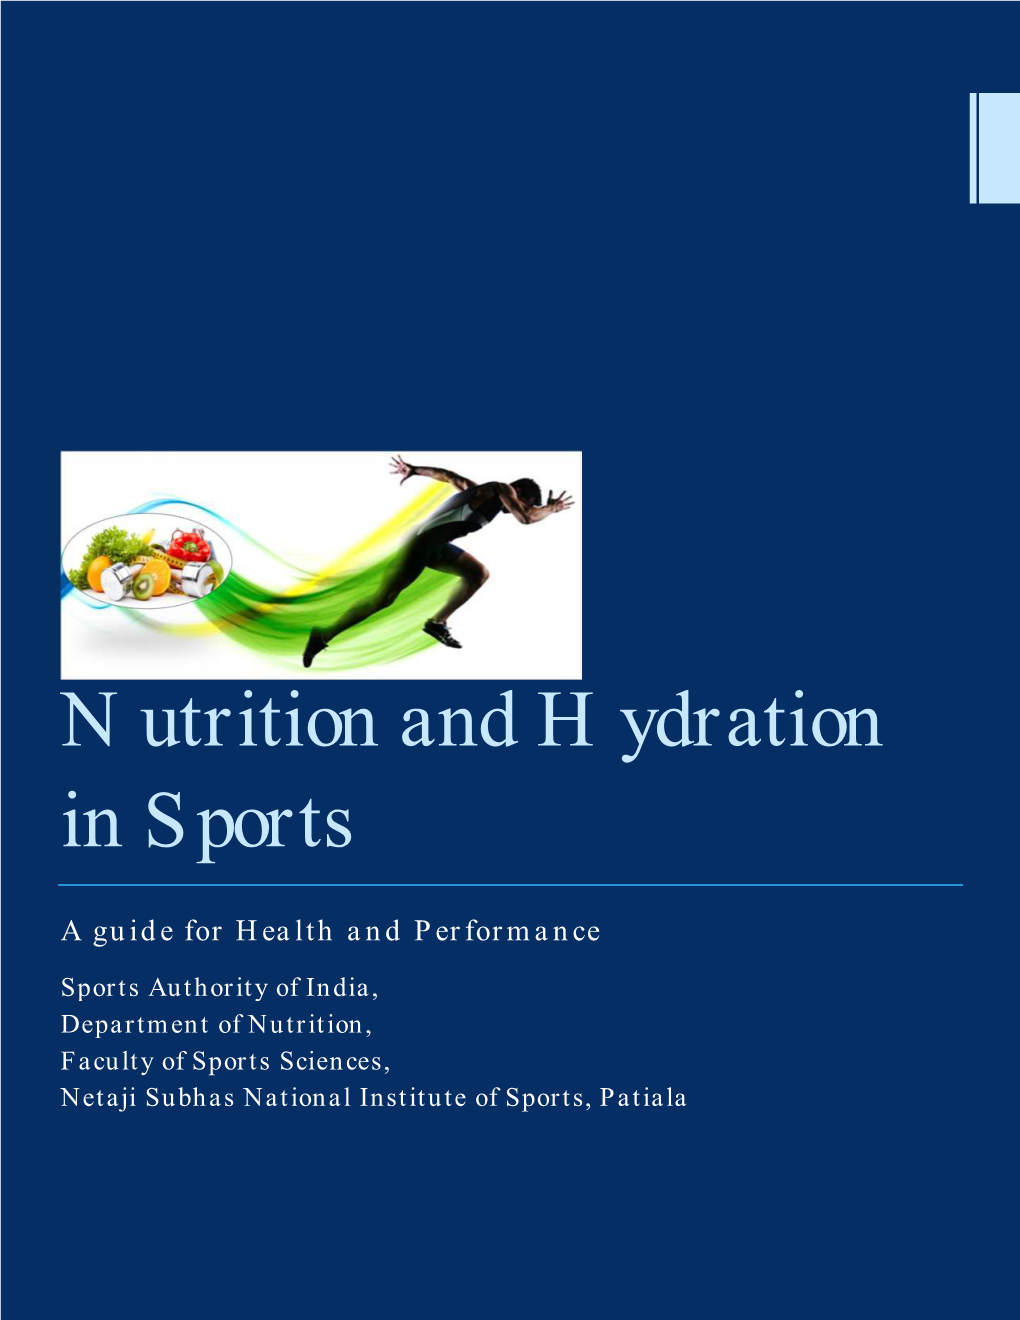 Nutrition and Hydration in Sports